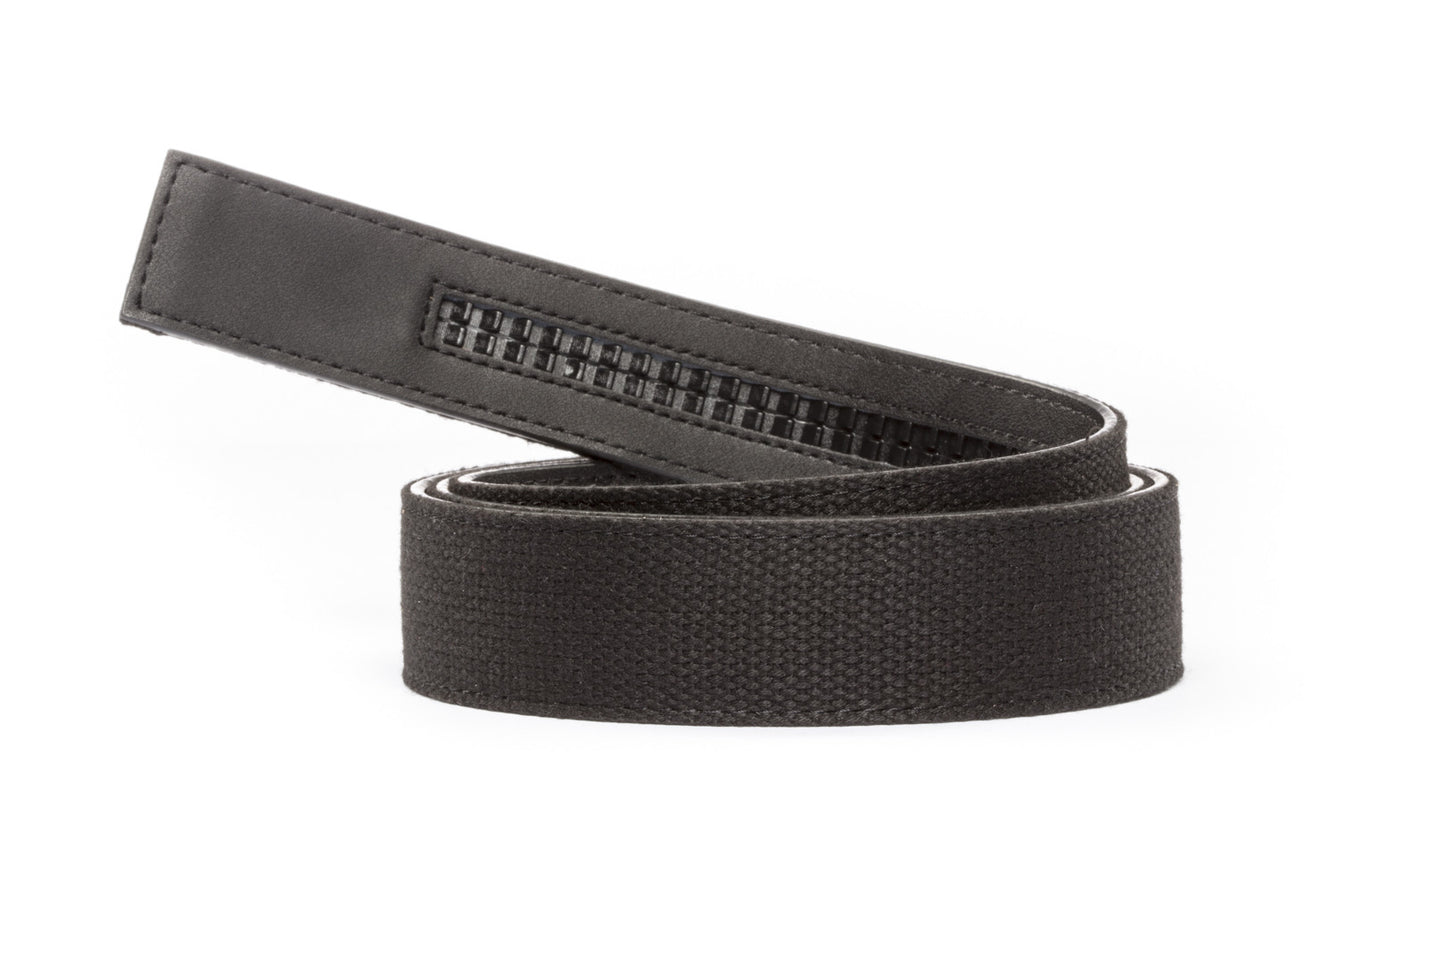 Men's canvas belt strap in black, 1.5 inches wide, casual look, microfiber back